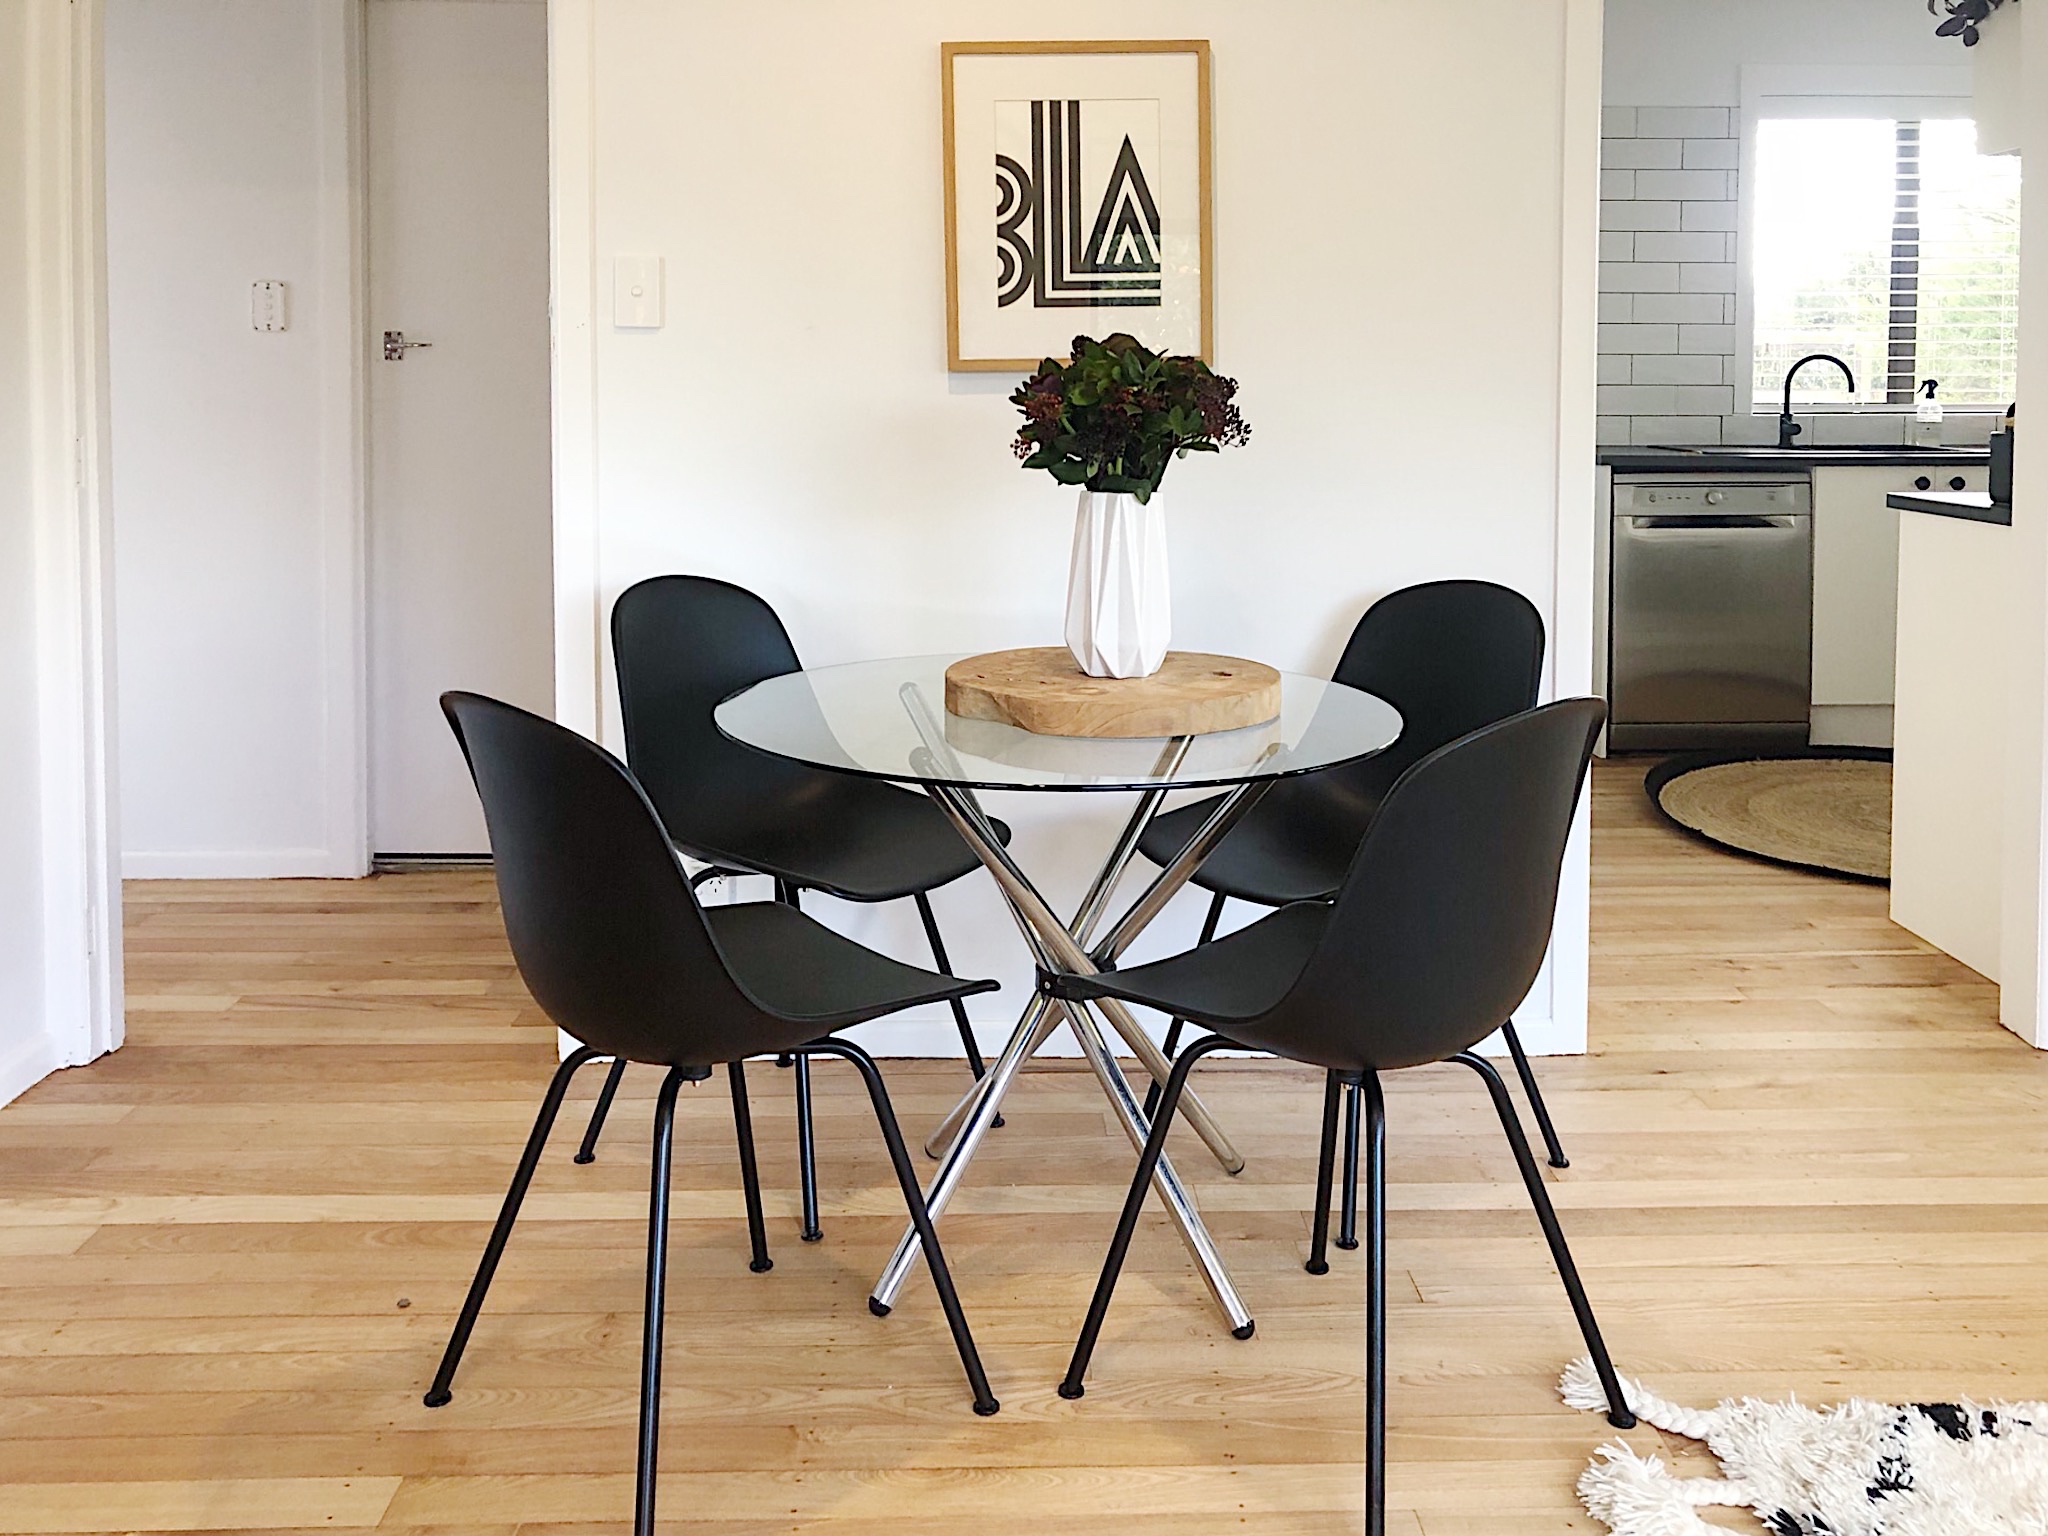 Pearson + Project The Reno Race The Rookies Lounge Tawa Floor Small Space Dining Space Round Table Black Chairs.jpg